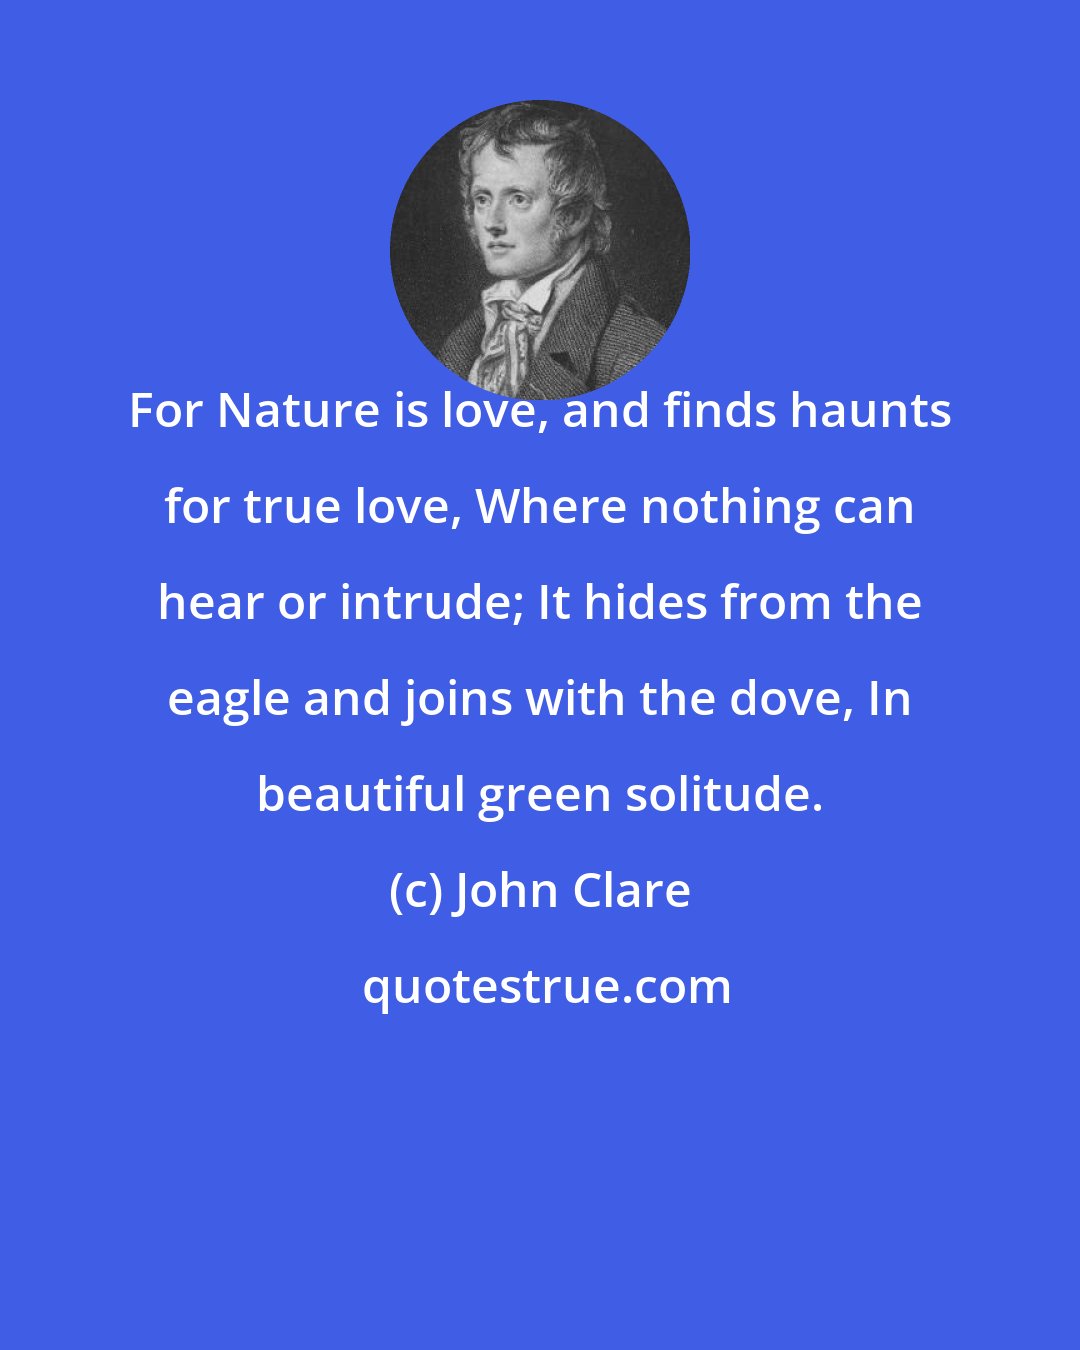 John Clare: For Nature is love, and finds haunts for true love, Where nothing can hear or intrude; It hides from the eagle and joins with the dove, In beautiful green solitude.